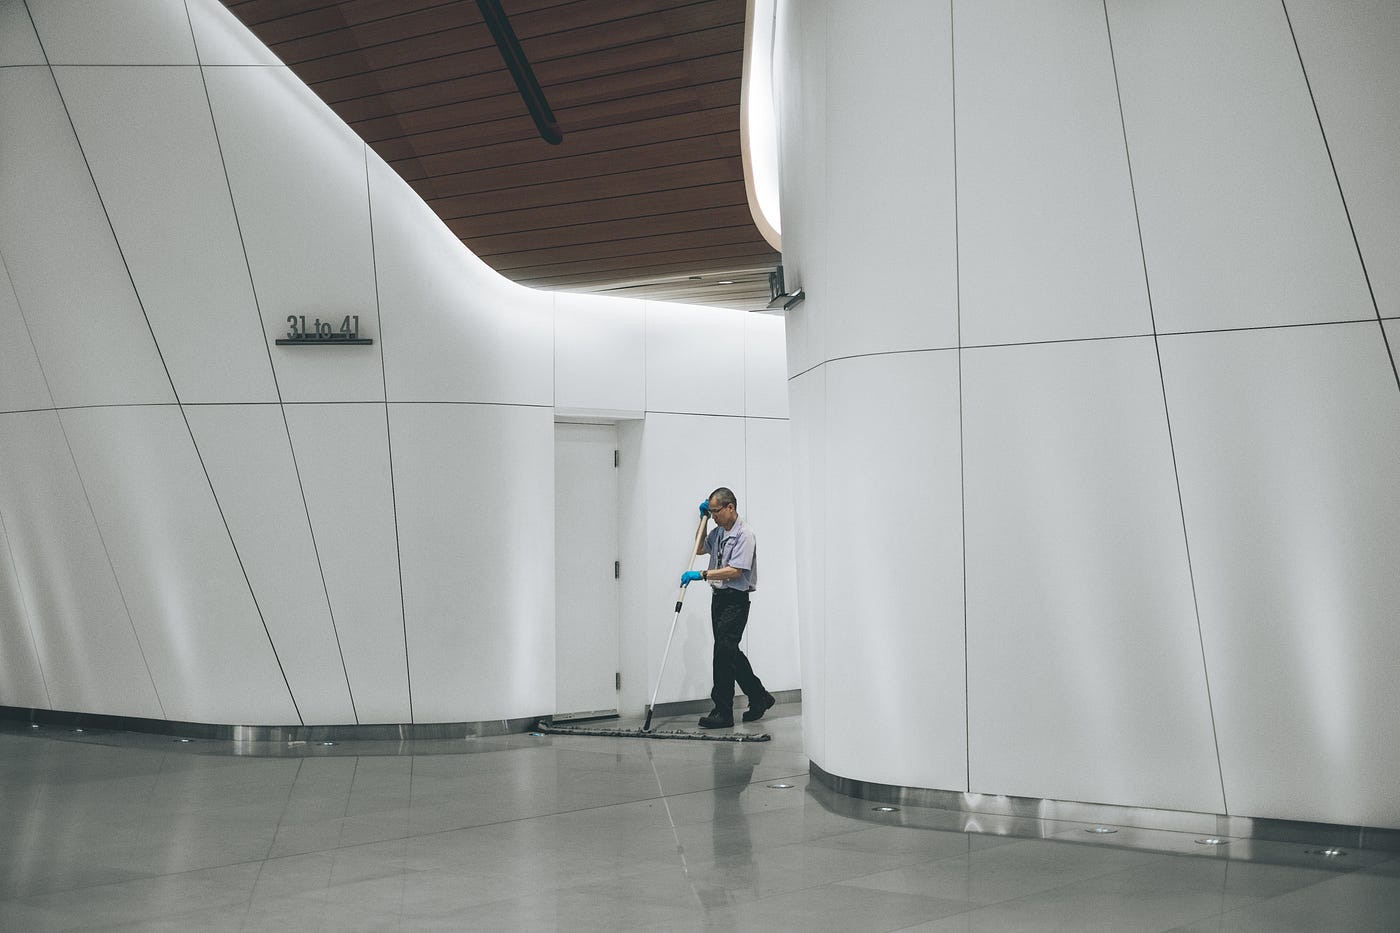 An Asian man sweeps with a long broom. He walks between white curing walls. The scene appears to be lit with fluorescent lights.